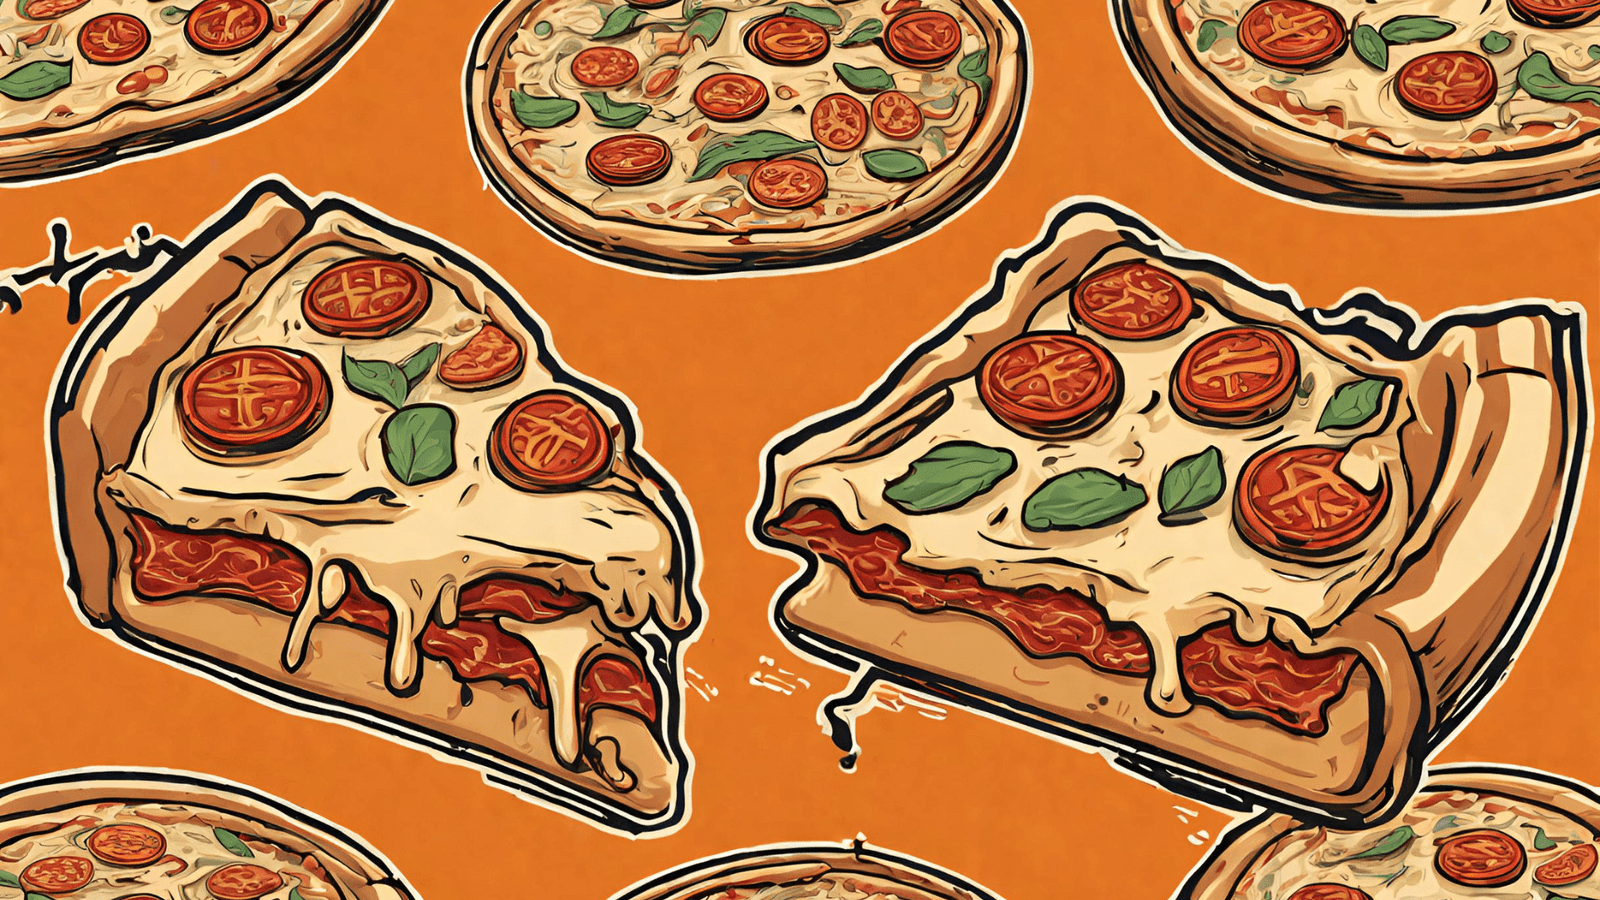 A Slice of Bitcoin: Unravelling the Fascinating Journey of Pizza as a Symbol of the Bitcoin Revolution